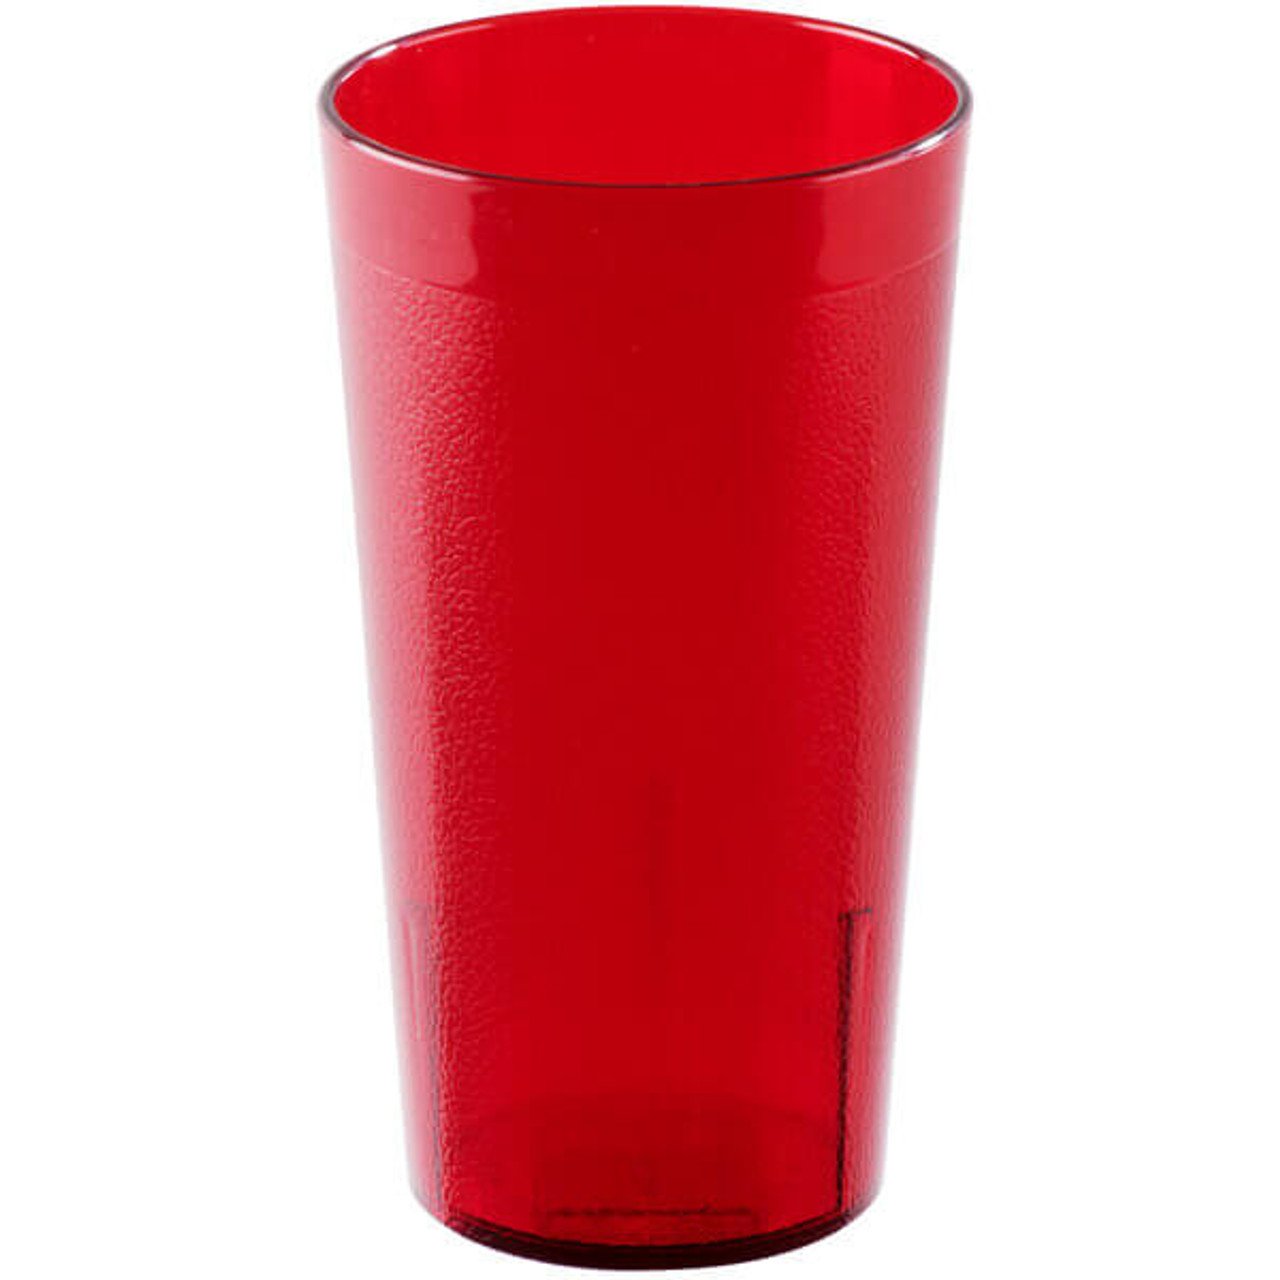 Cambro 16 2/5 oz Ruby Red Textured Plastic Tumbler (24/Case) - Resistant SAN - Chicken Pieces